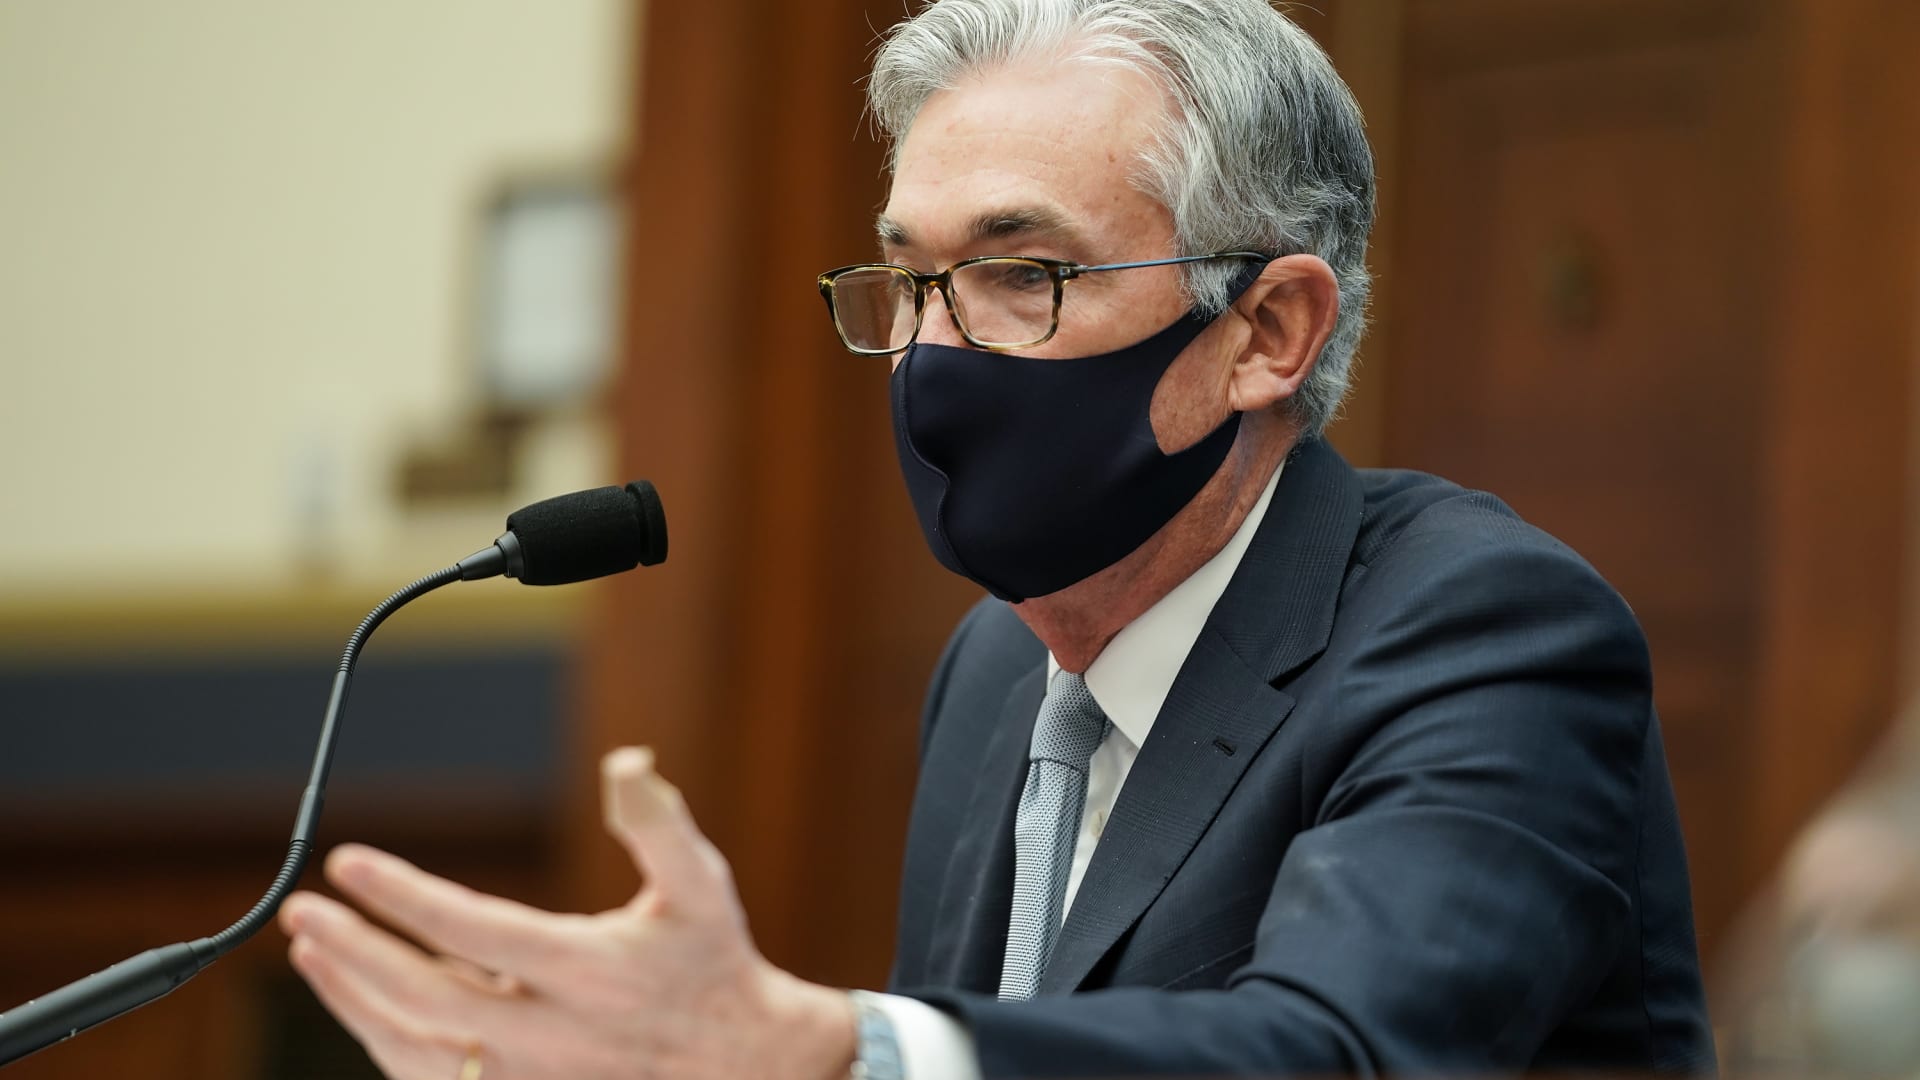 Federal Reserve Chairman Jerome Powell during a House Financial Services Committee hearing on Dec. 2, 2020 in Washington.